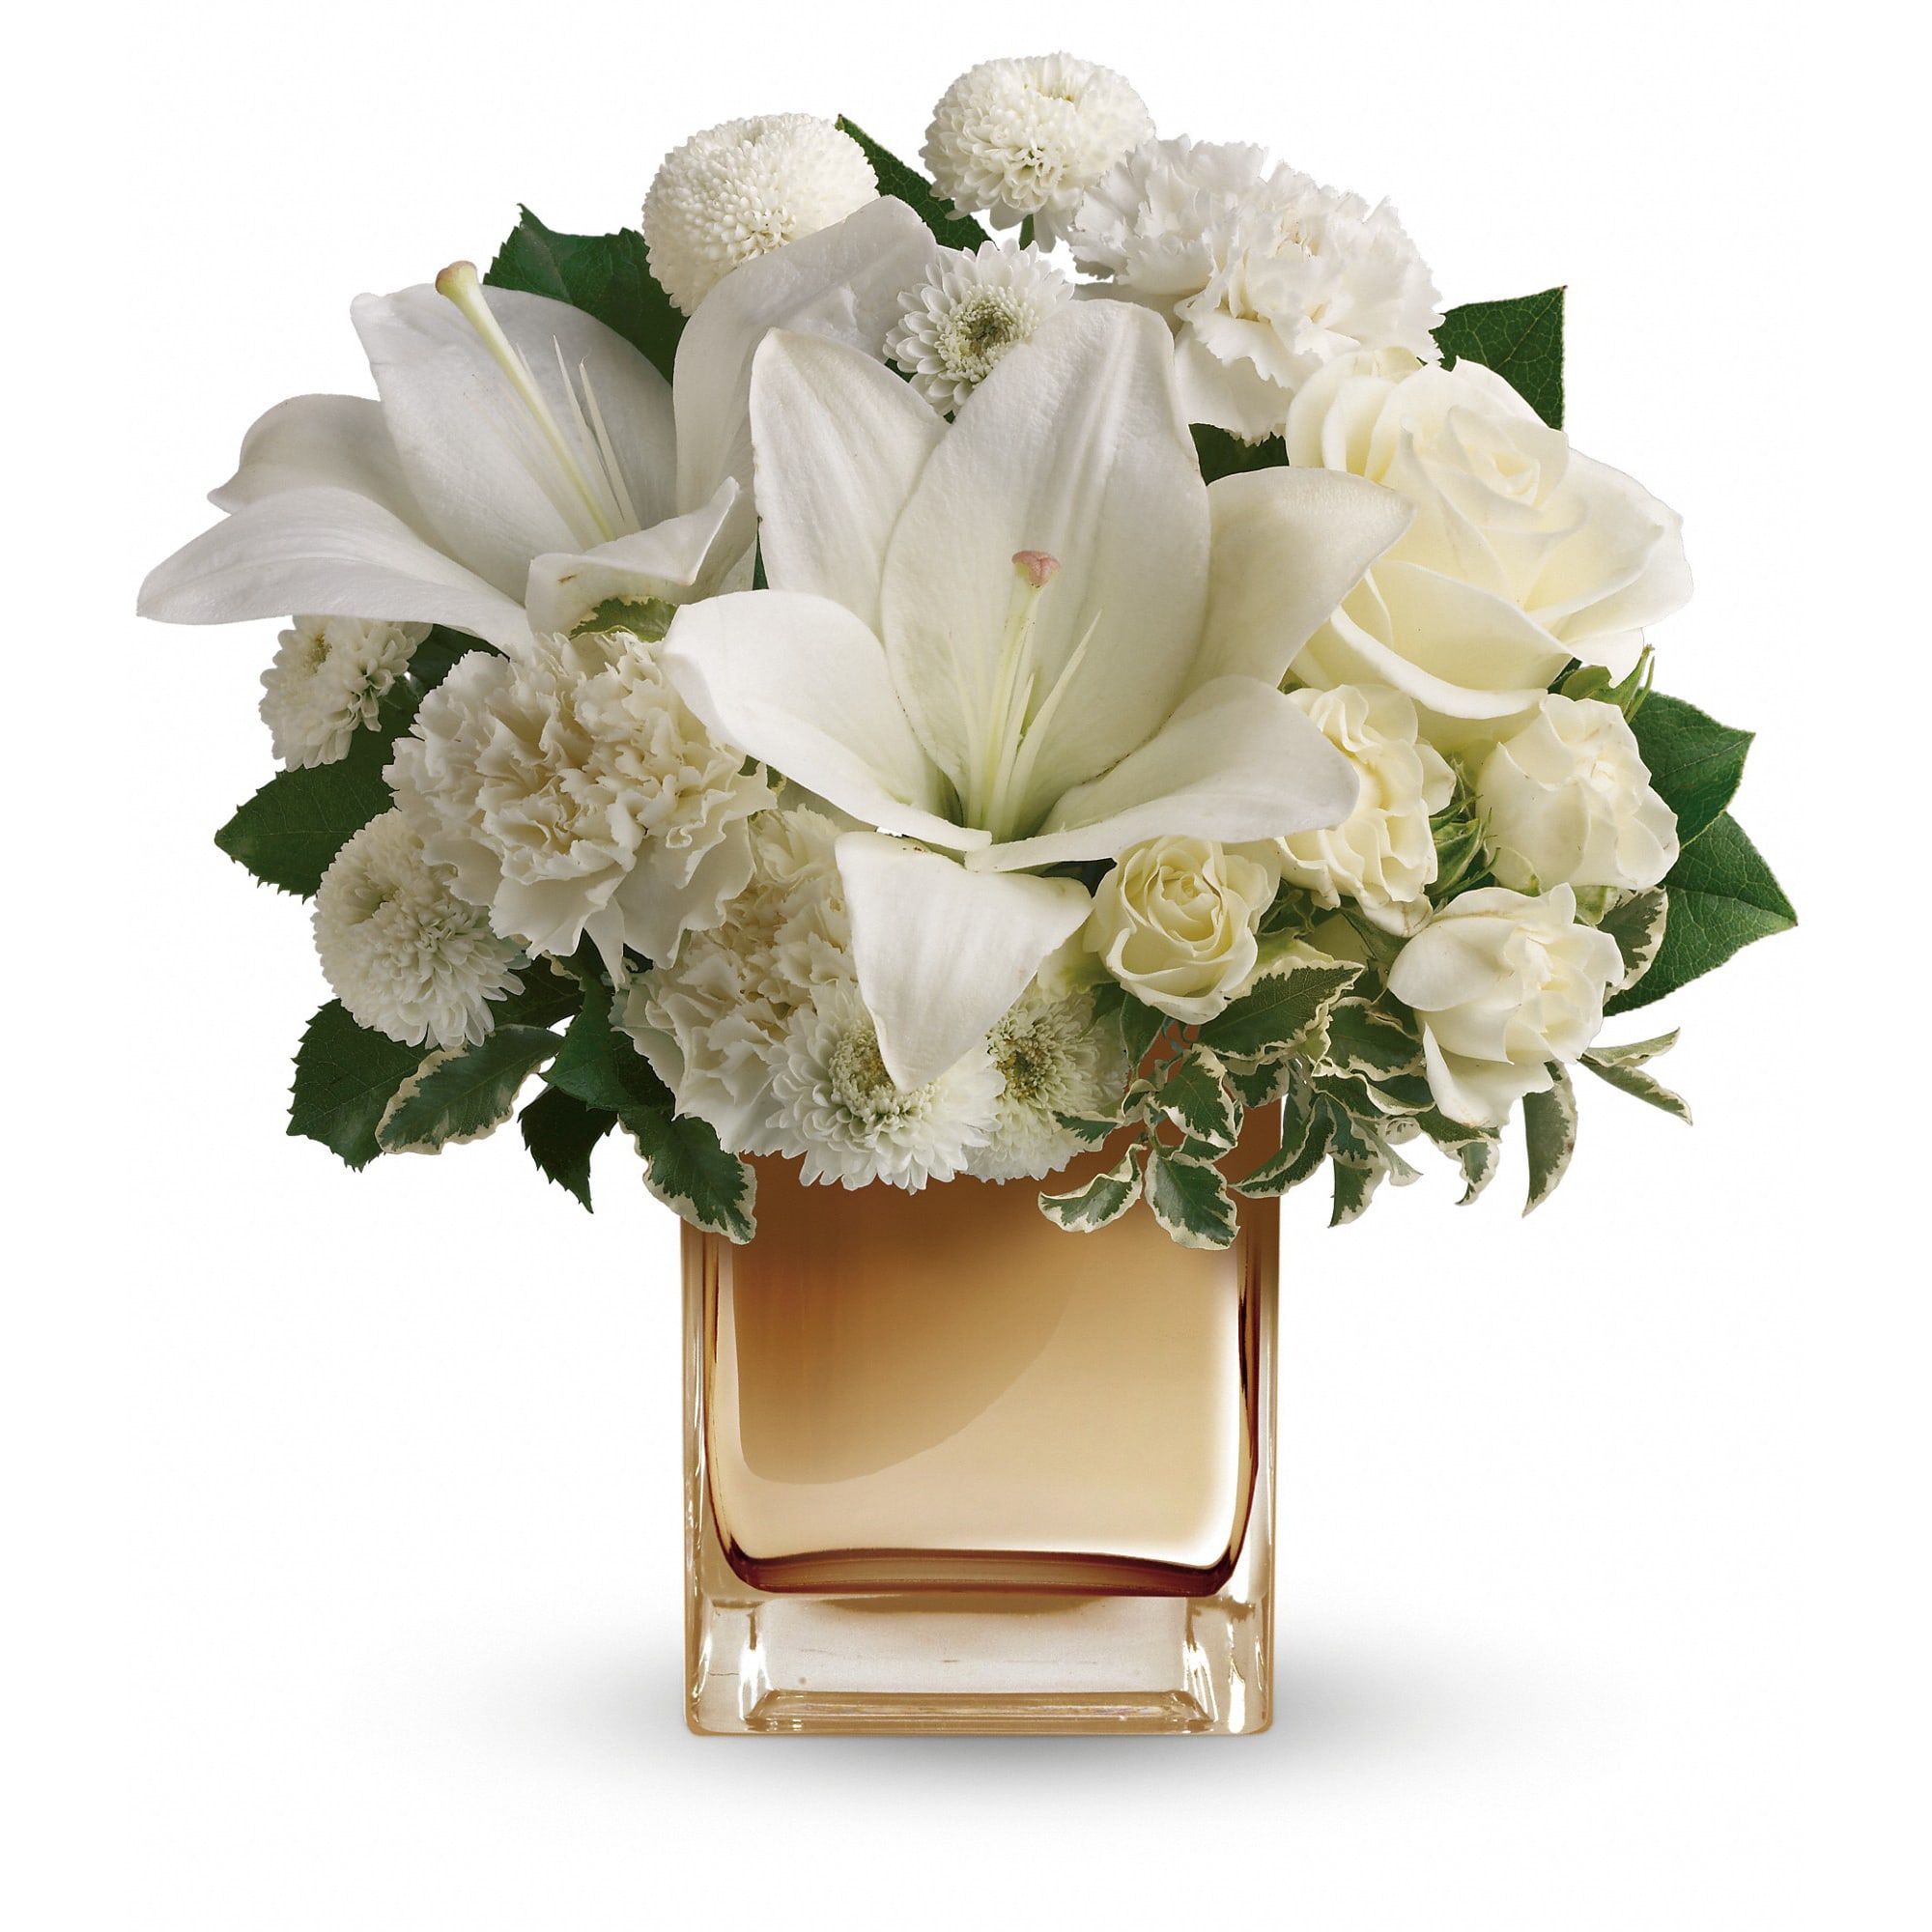 Starlit Kisses by Teleflora - Wish upon a star, but seal the deal with the pure white perfection of this luxurious bouquet. Arranged in a shimmering bronze cube for a stylish contrast, these fresh and fragrant flowers will make you the star of her heart!